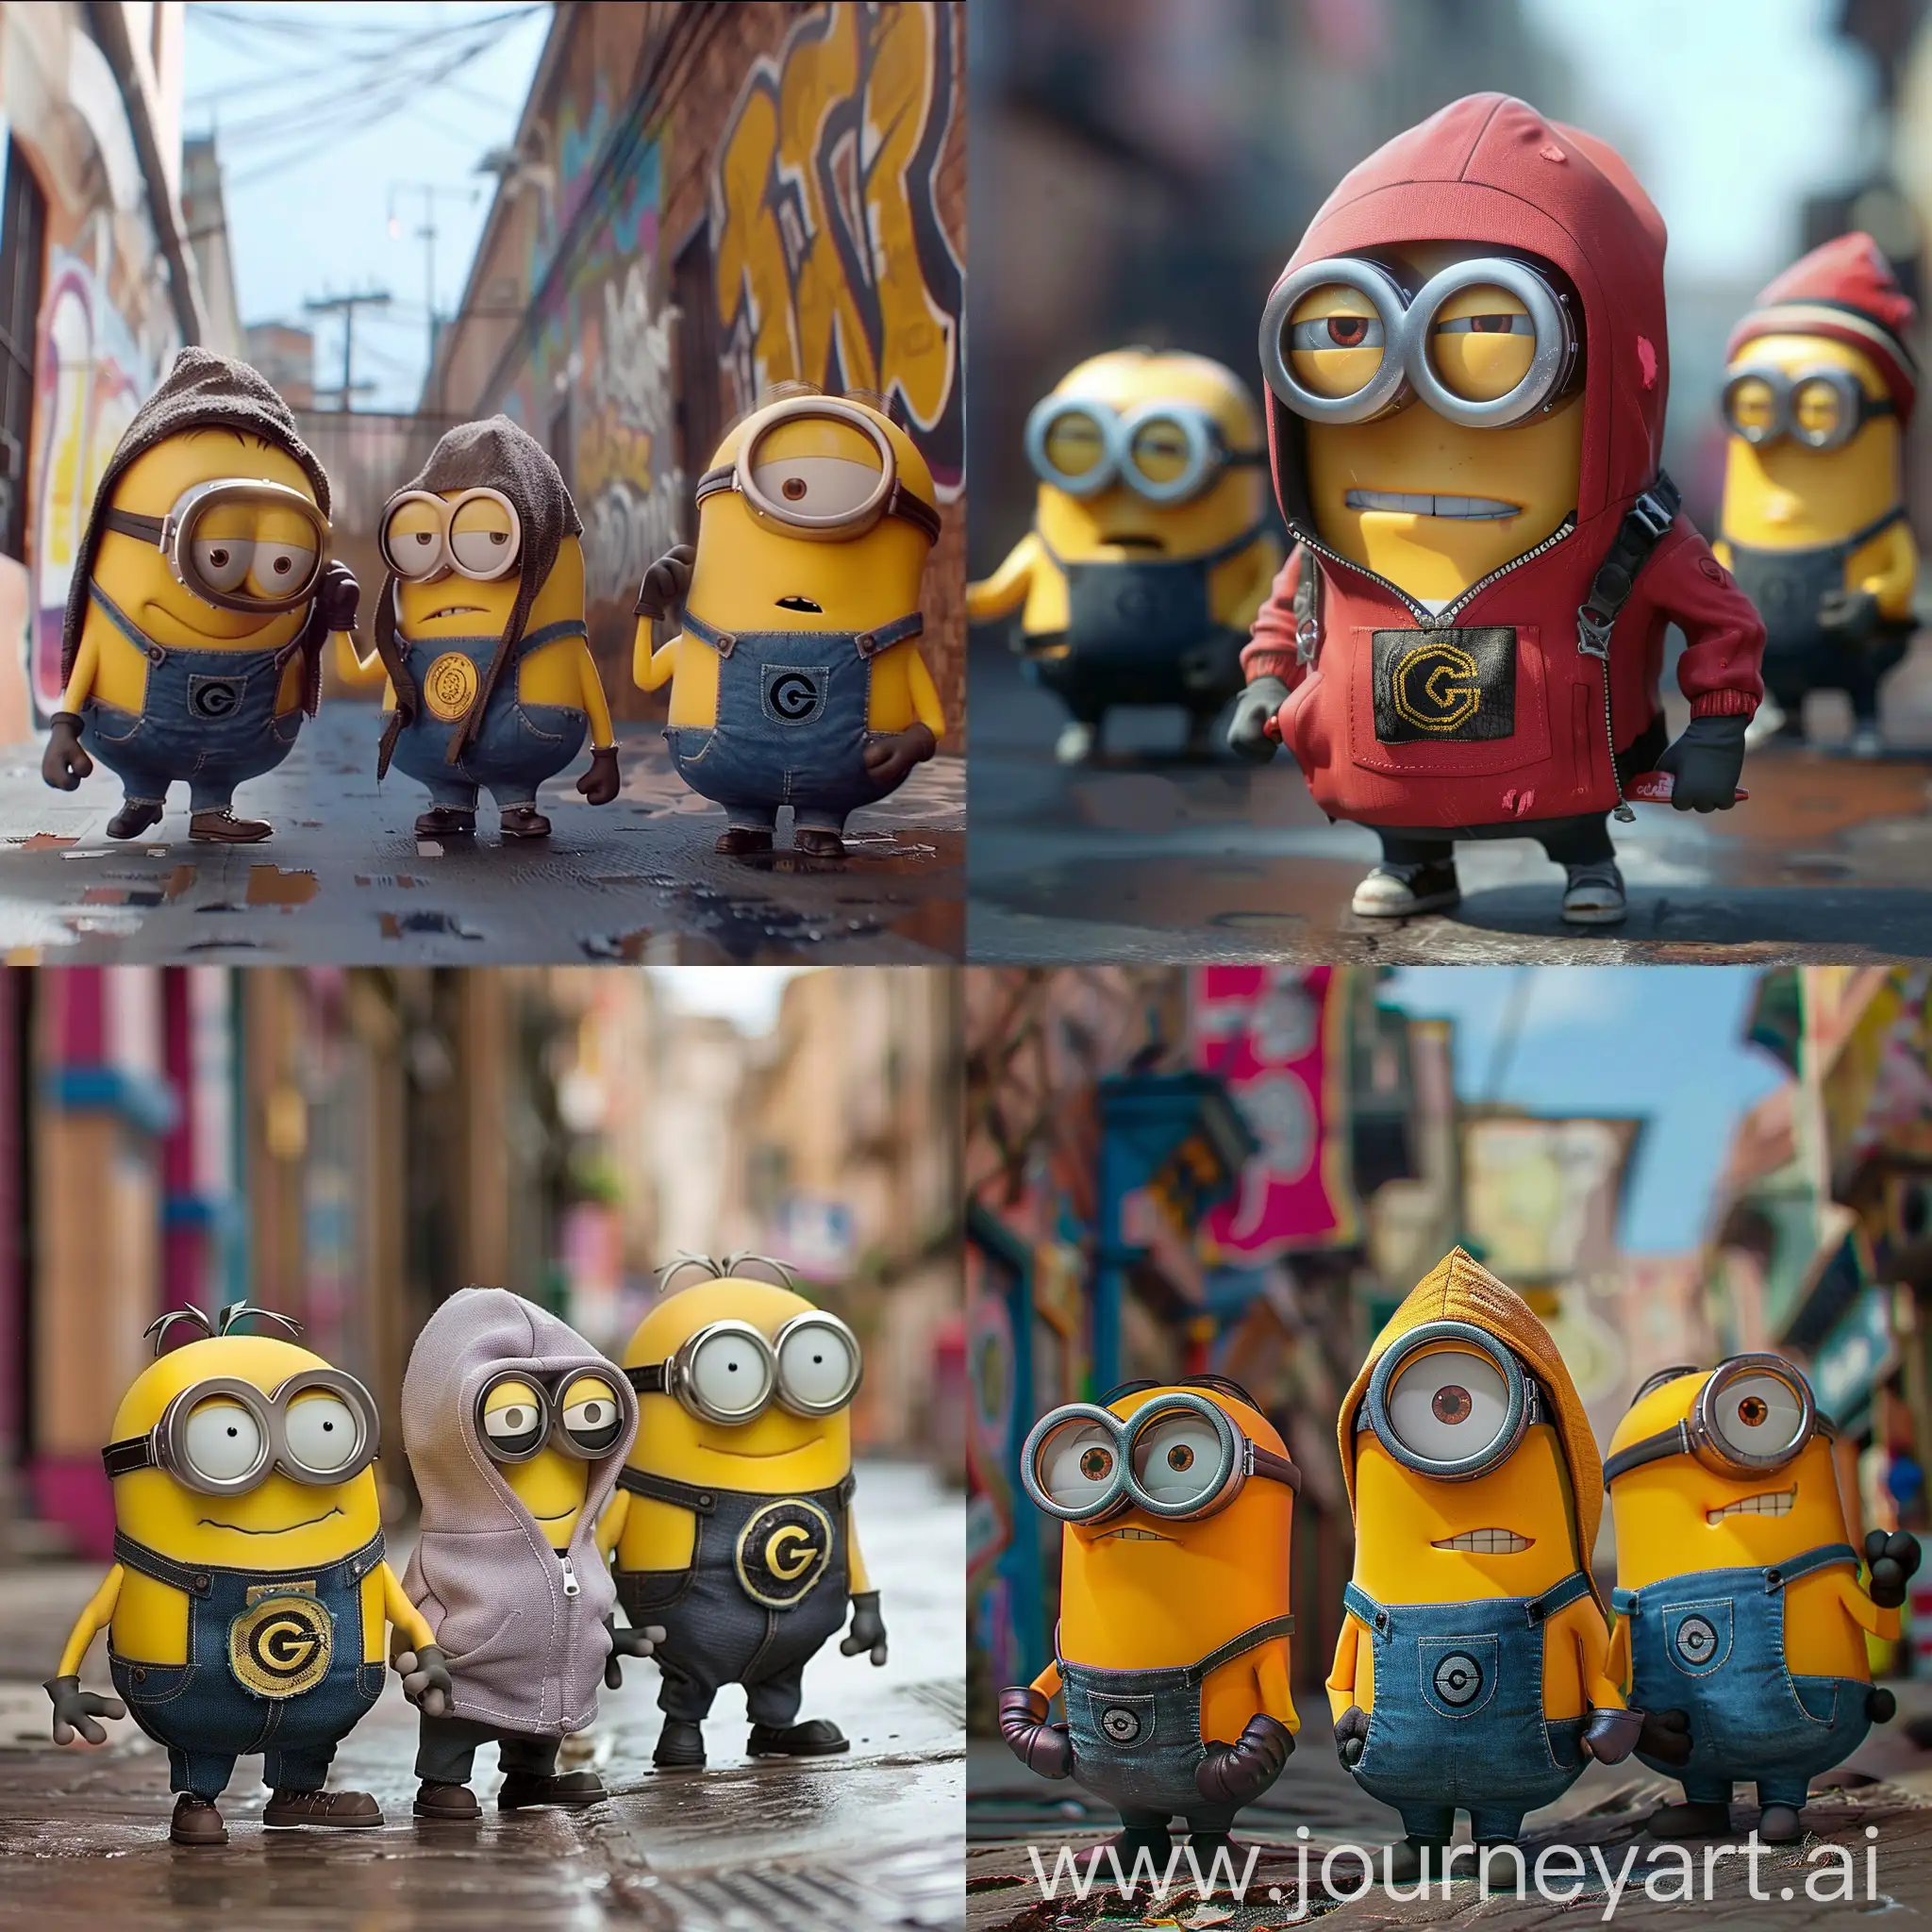 Mischievous-Minions-Dressed-as-Thugs-in-Urban-Setting